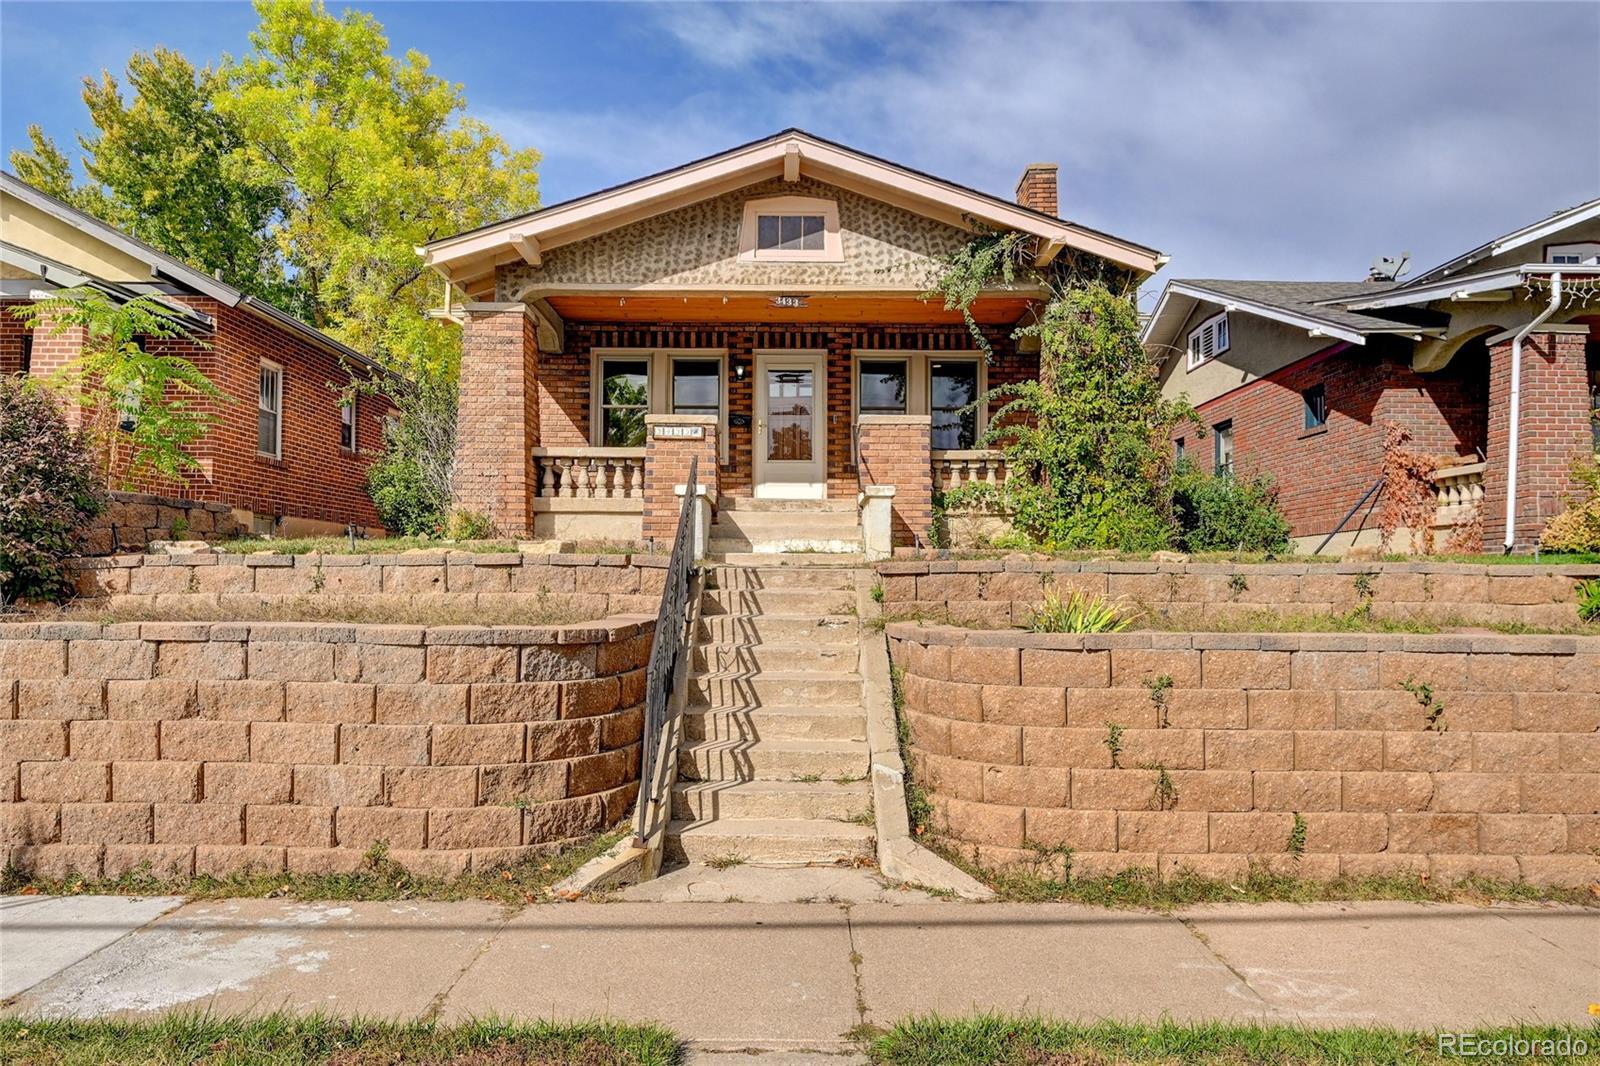 Photo one of 3433 22Nd Ave Denver CO 80211 | MLS 9842599